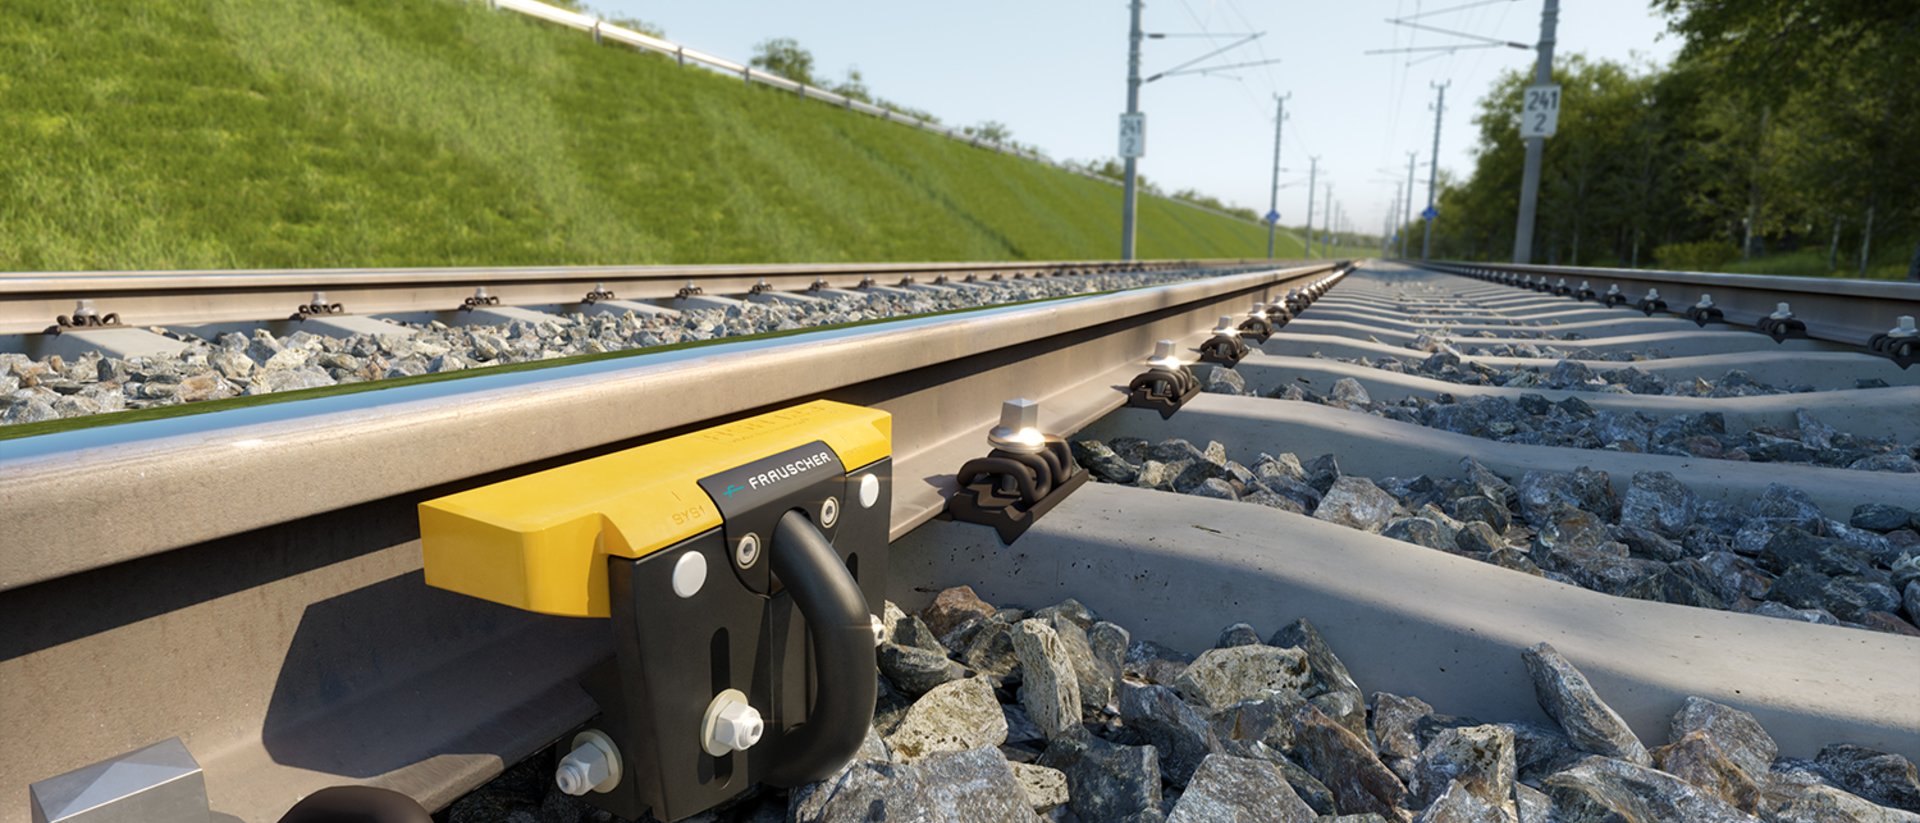 Frauscher rail signalling systems for the entire product lifecycle